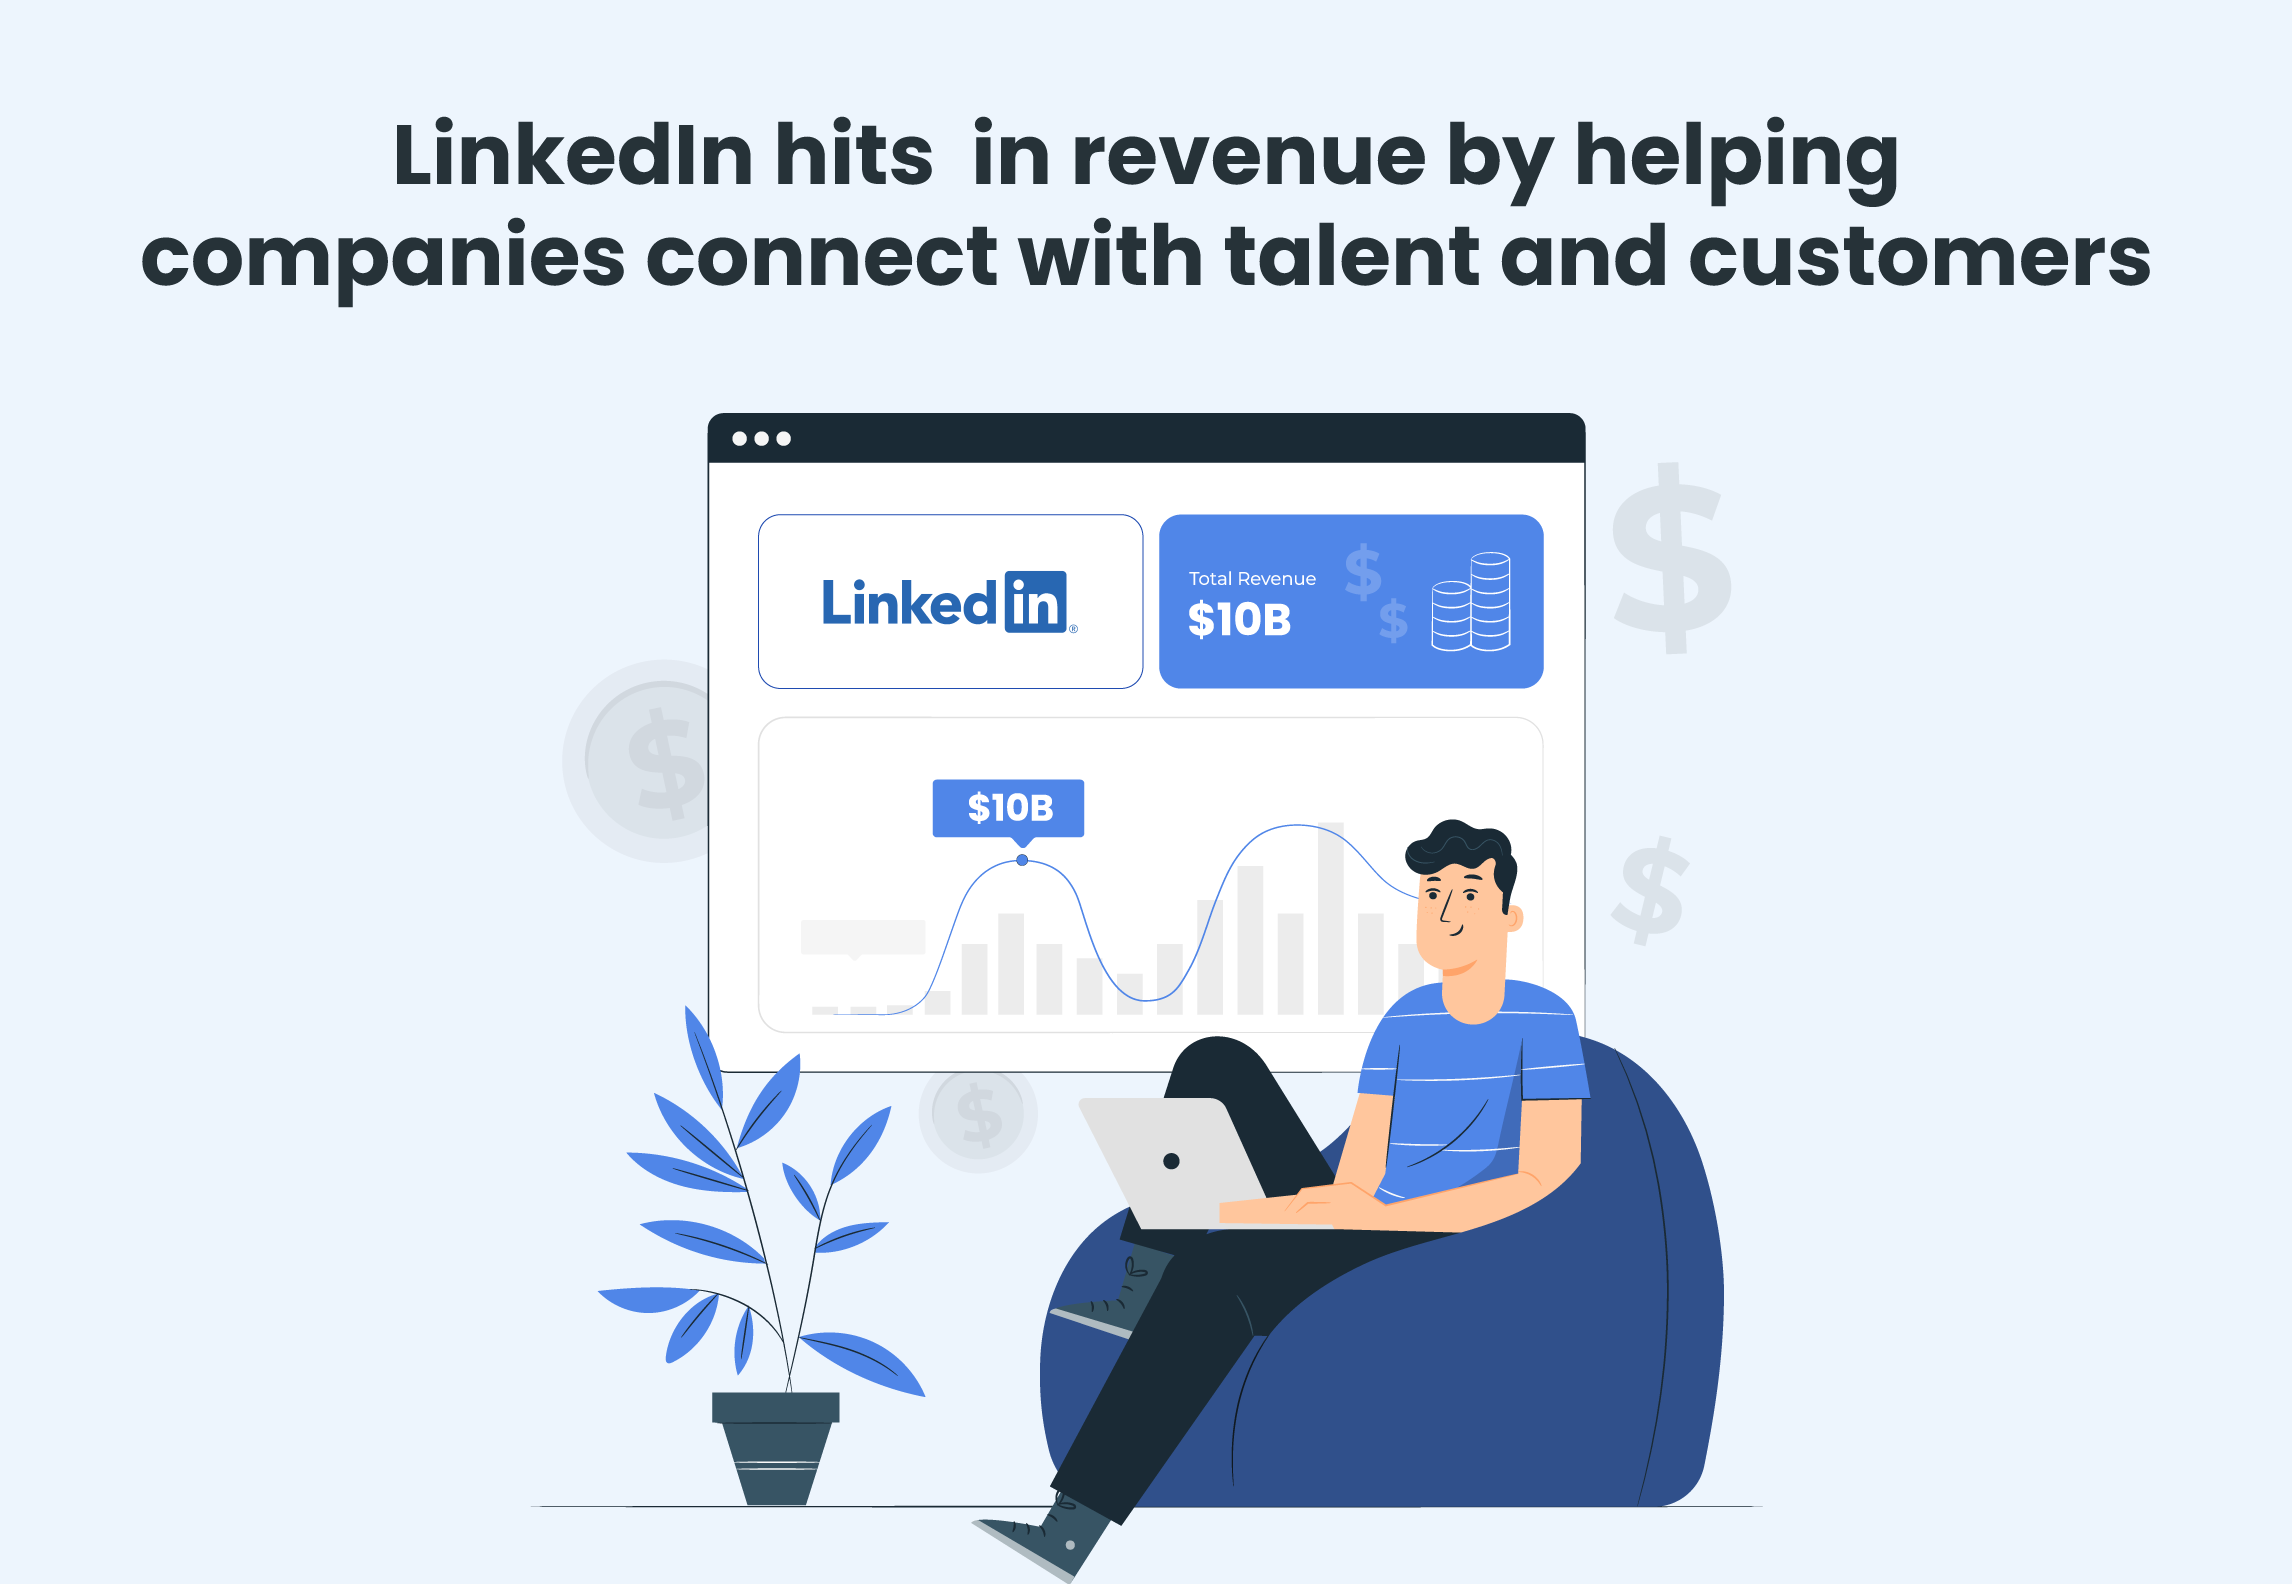 LinkedIn hits 10B in revenue by helping companies connect with talent and customers 1 - Knovator